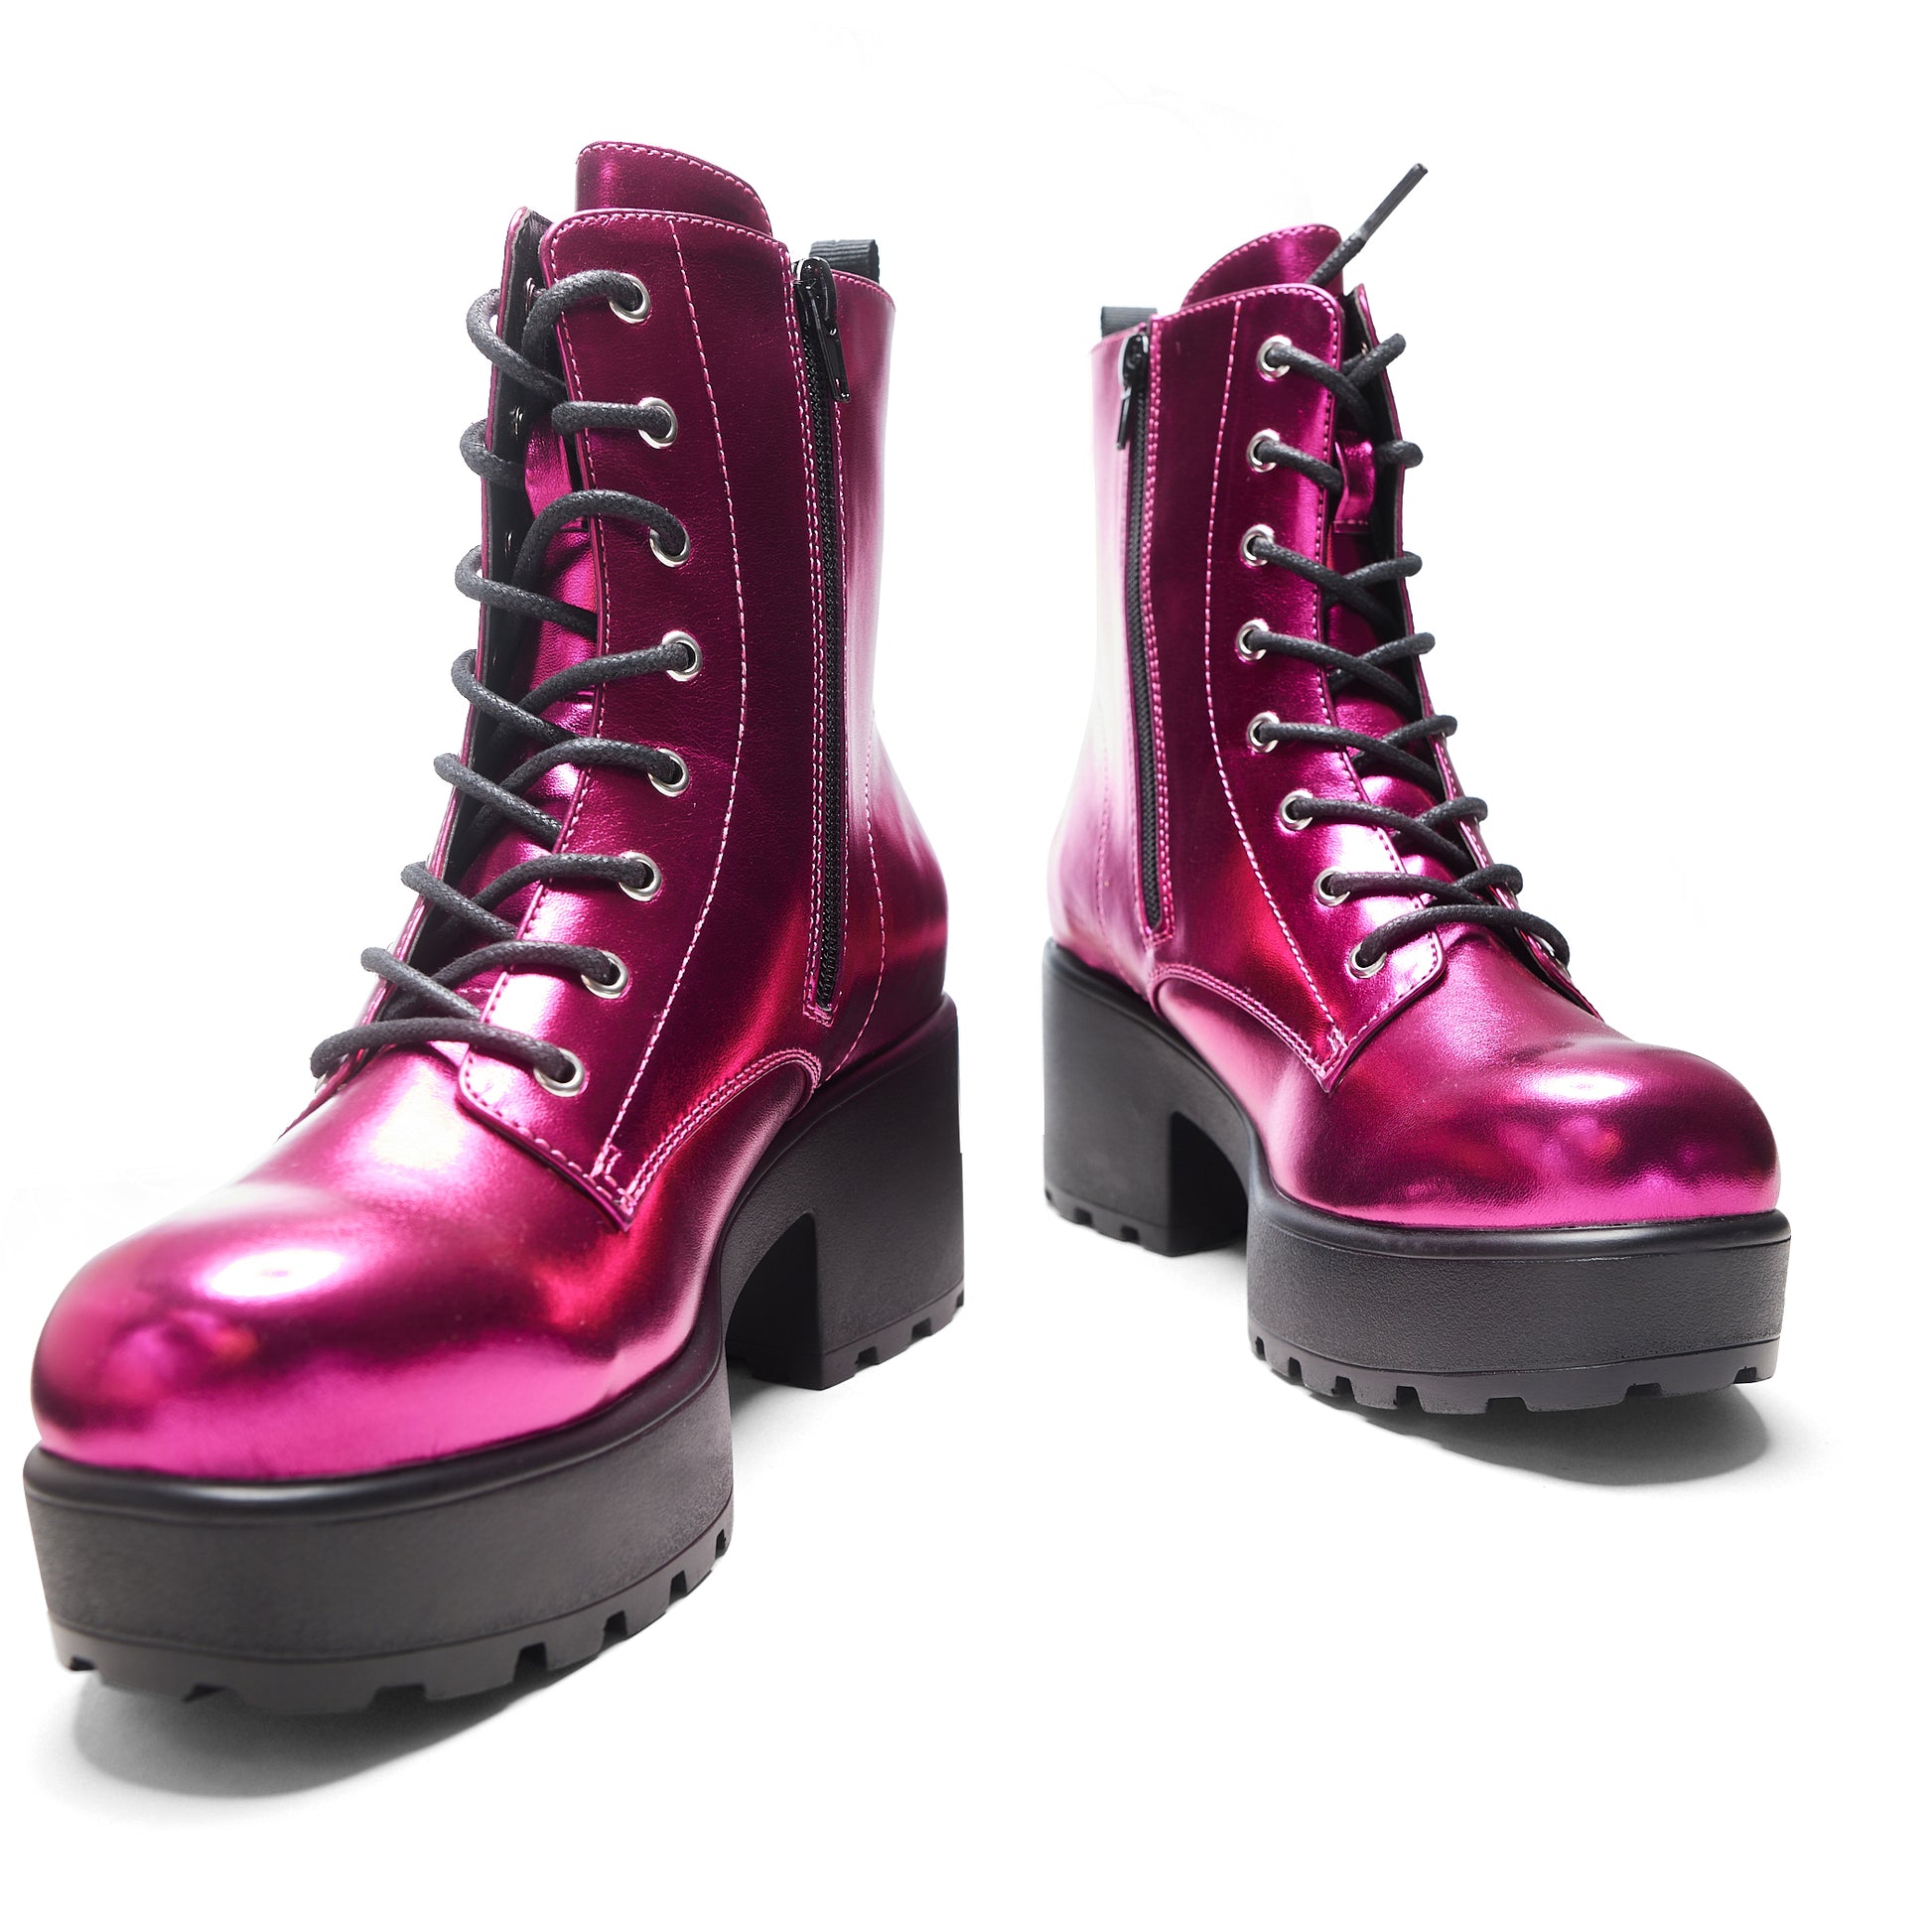 Fuschia Haze Military Platform Boots - Ankle Boots - KOI Footwear - Pink - Front View